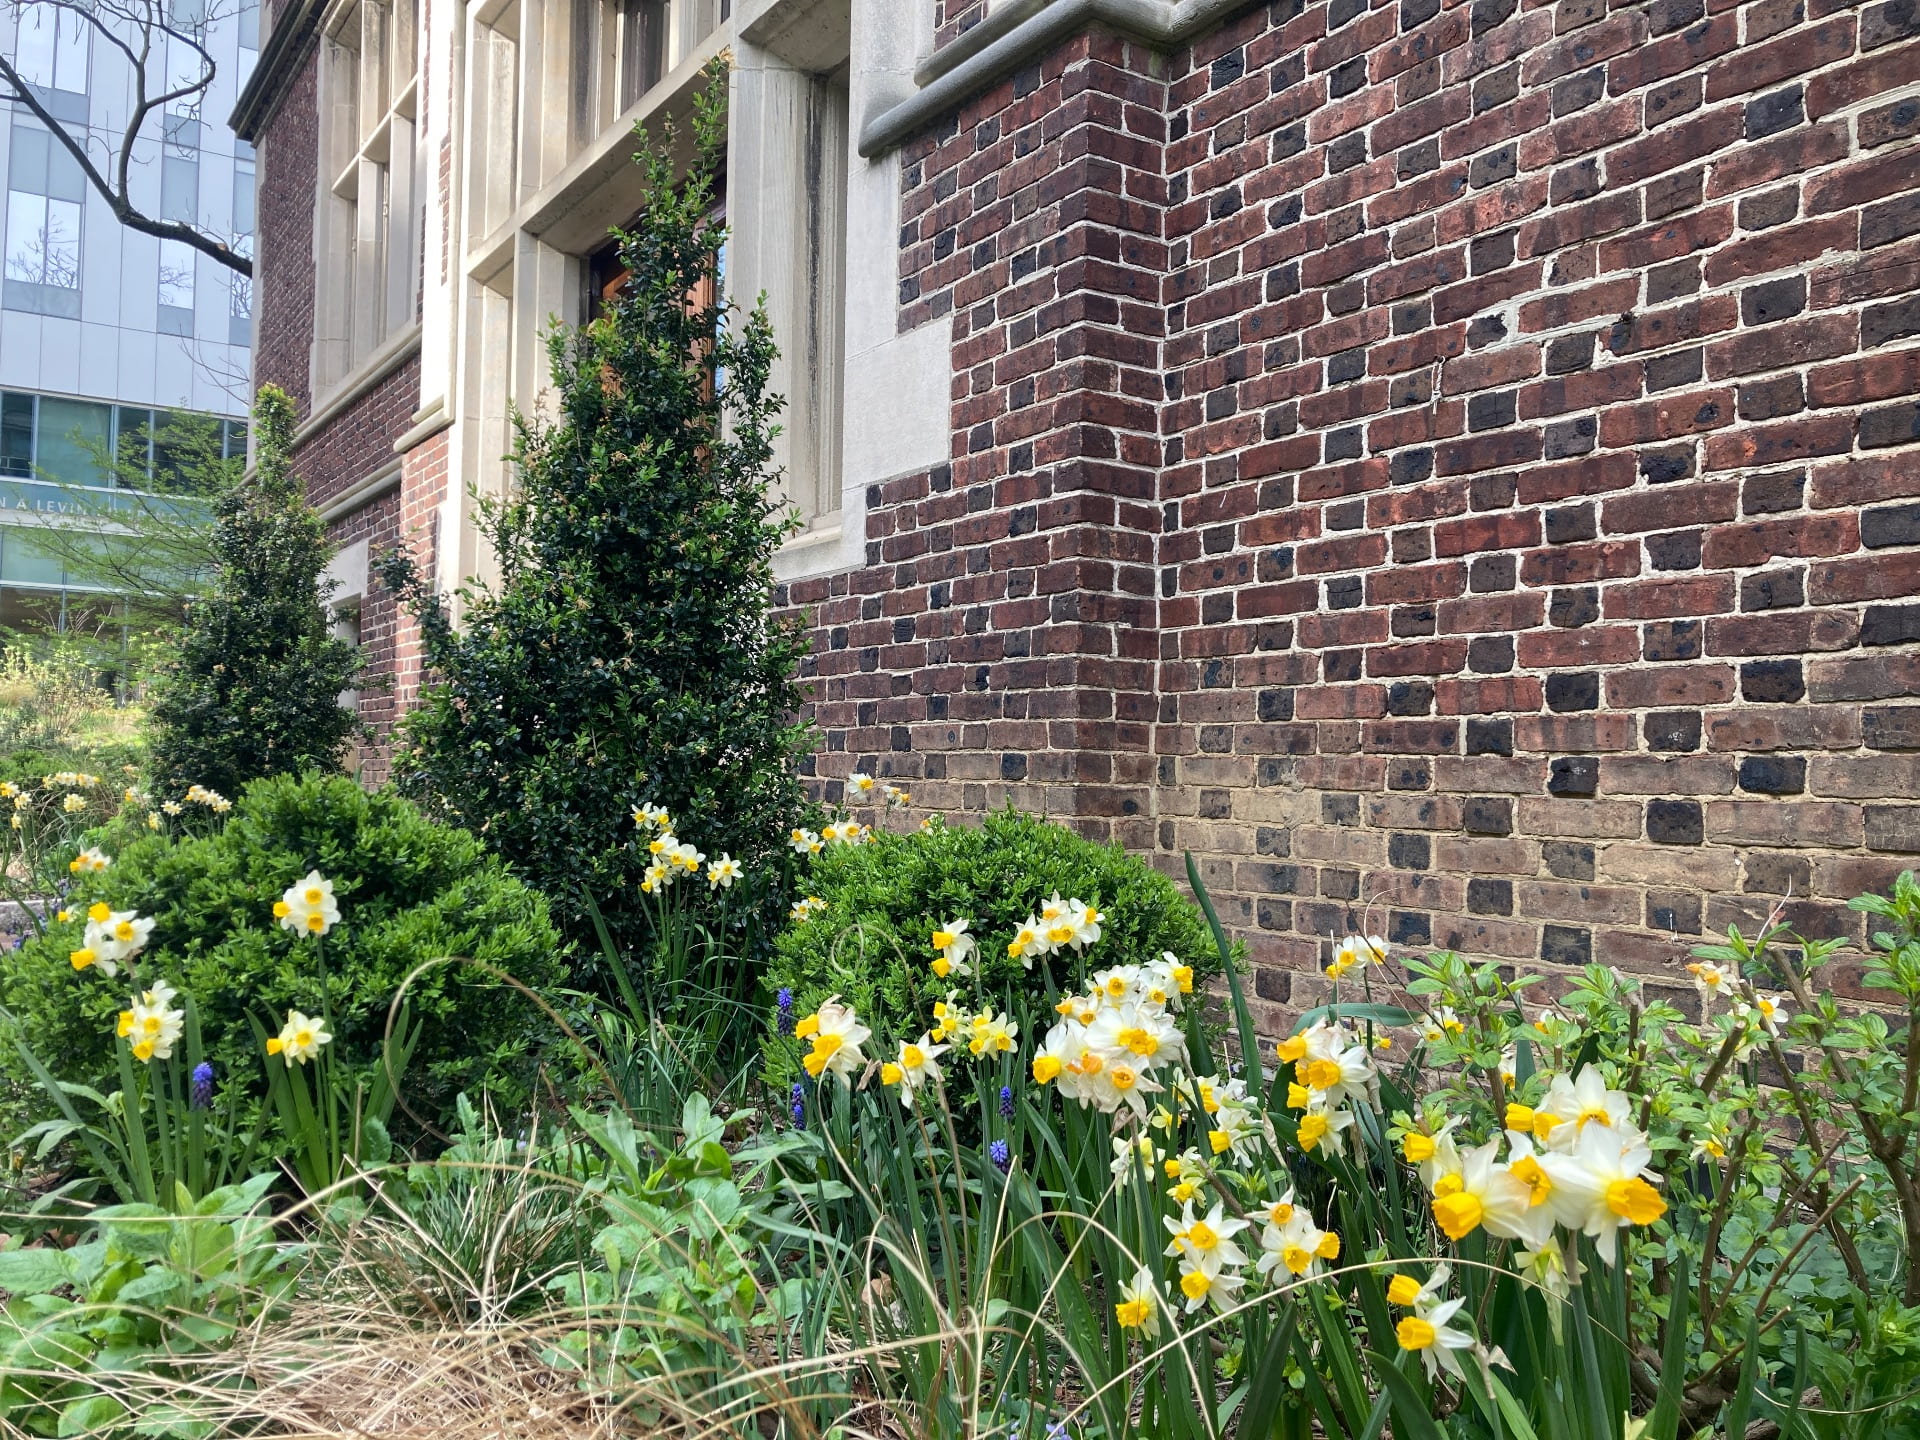 Daffodils and grape hyacinths mingle with boxwoods and sedges growing on the east side of Leidy.